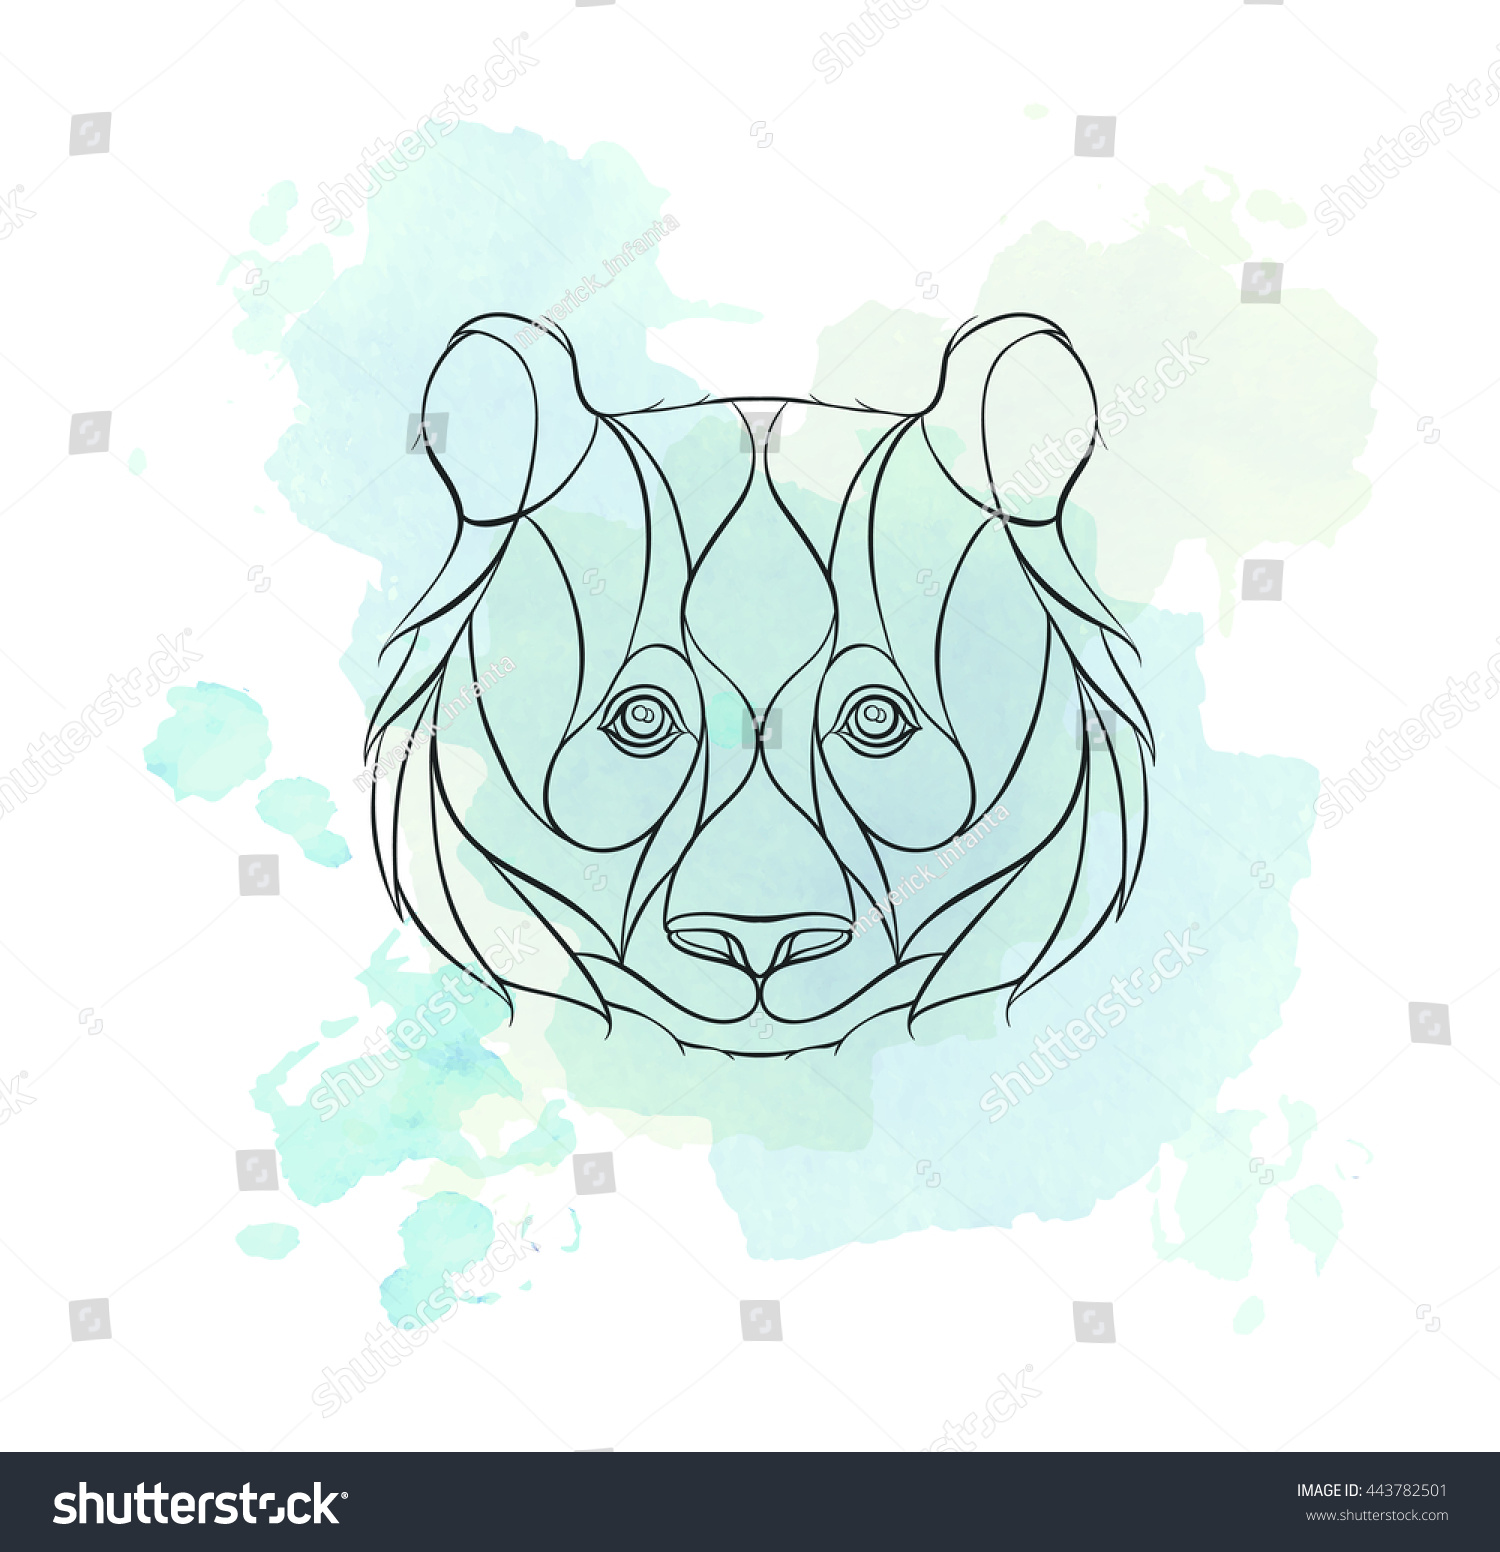 SVG of Head of the panda on the grunge background. African / indian / totem / tattoo design. It may be used for design of a t-shirt, bag, postcard, a poster and so on.   svg